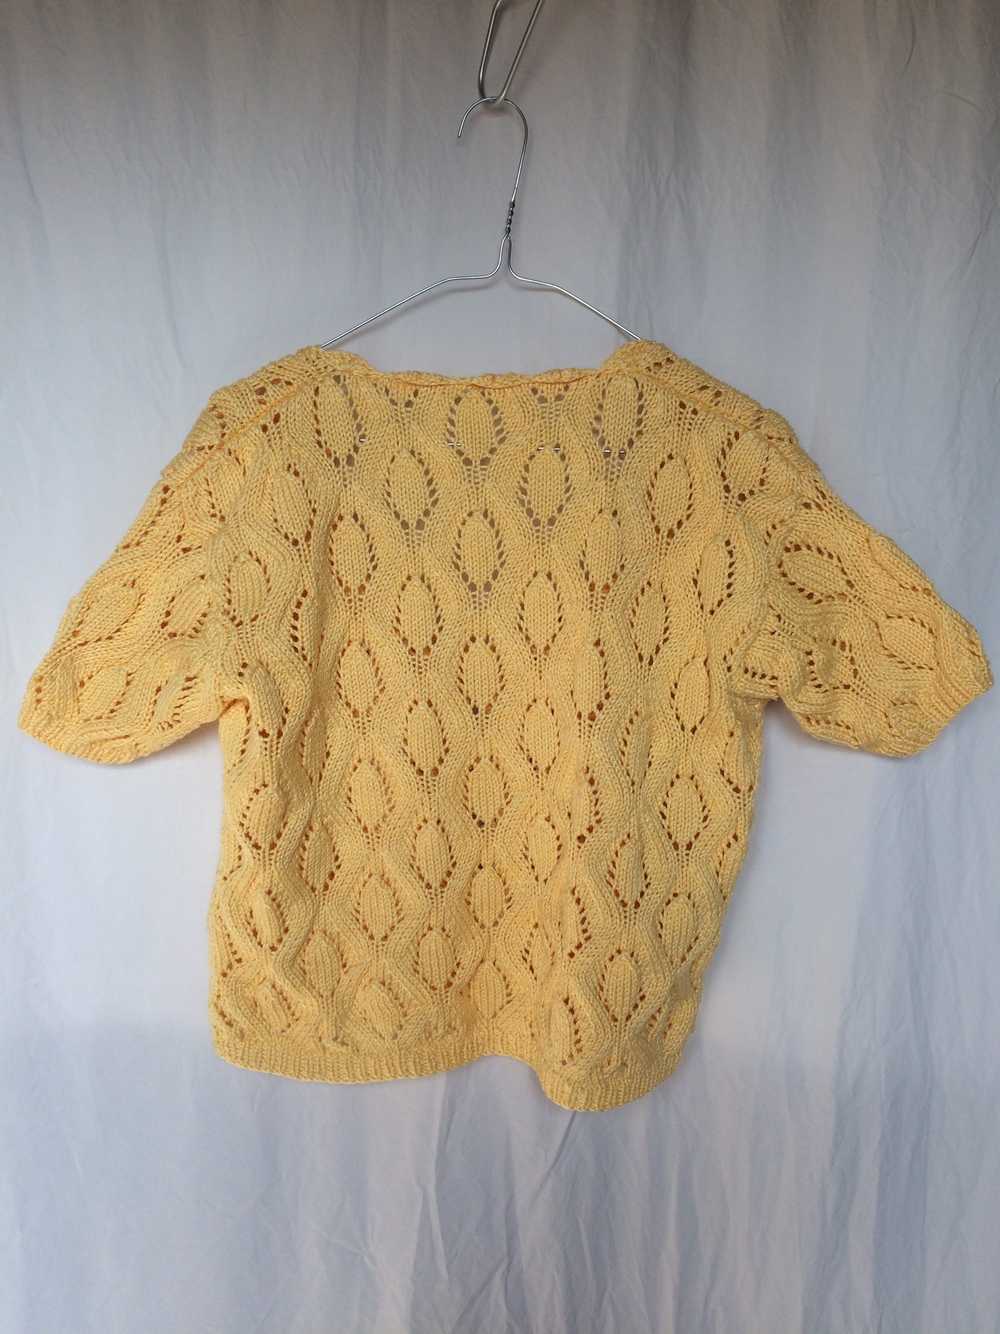 Knit top - Handmade yellow cotton knit with golde… - image 2